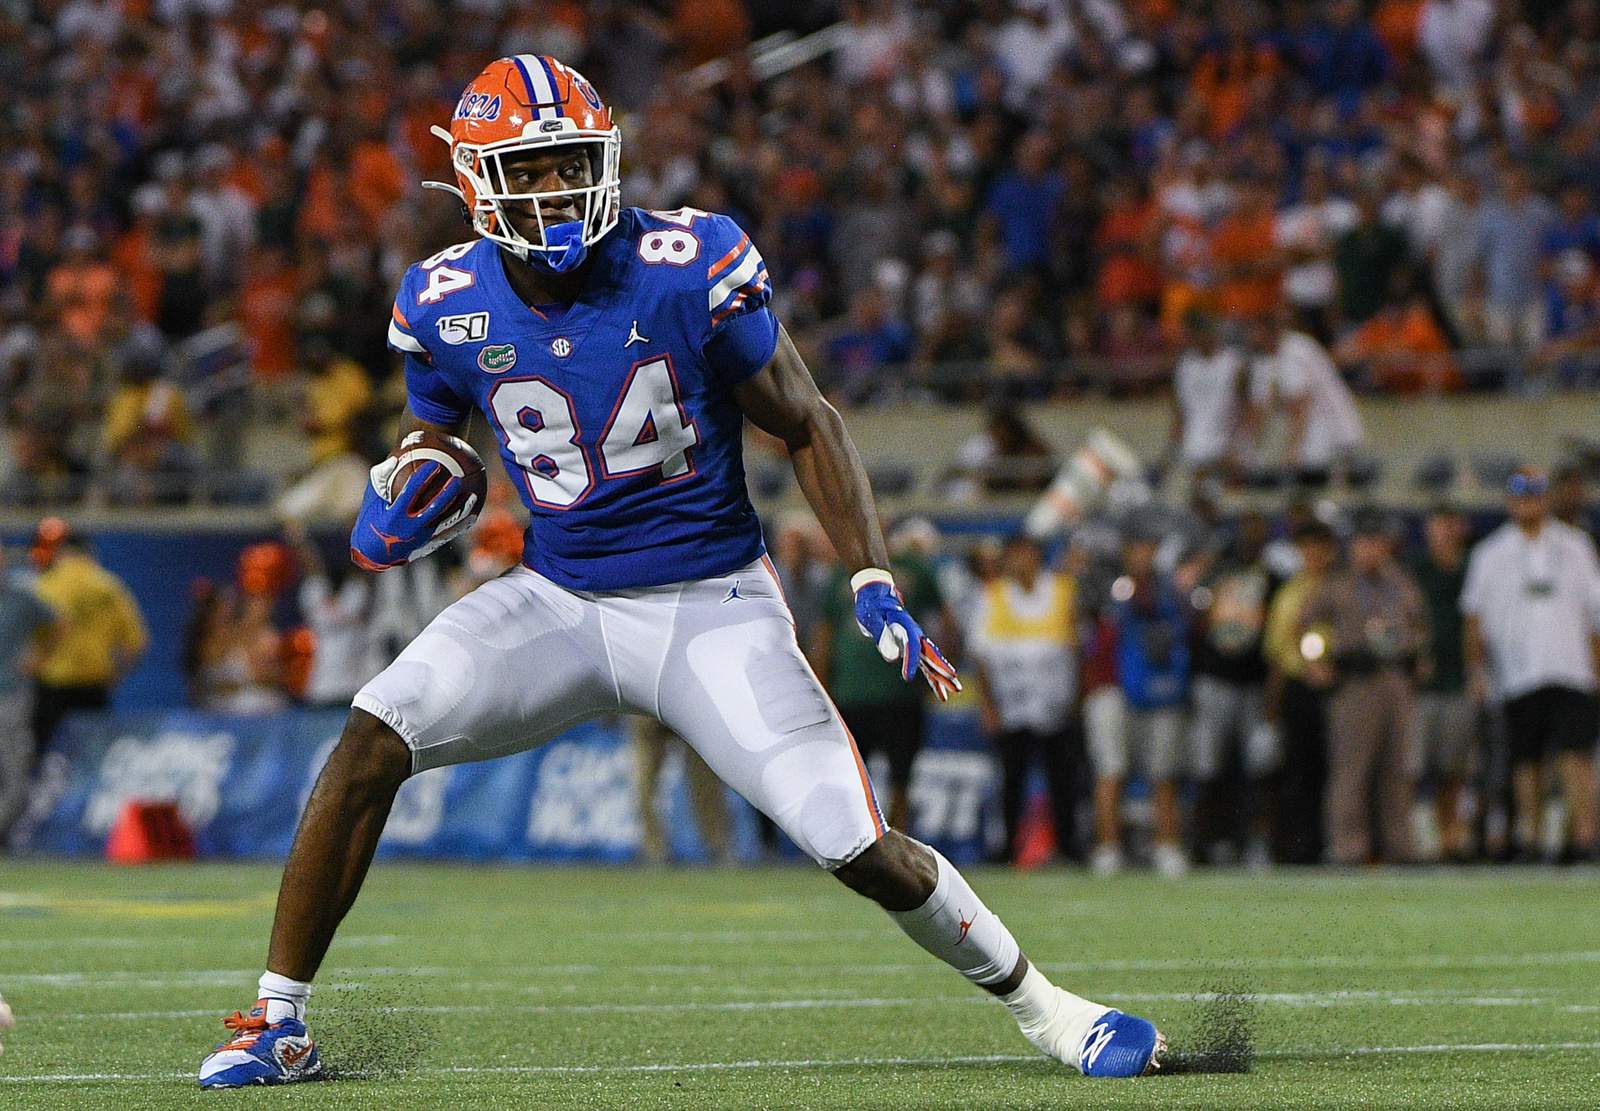 Gators Breakdown: While not elite, Florida has talent for a title run in 2020